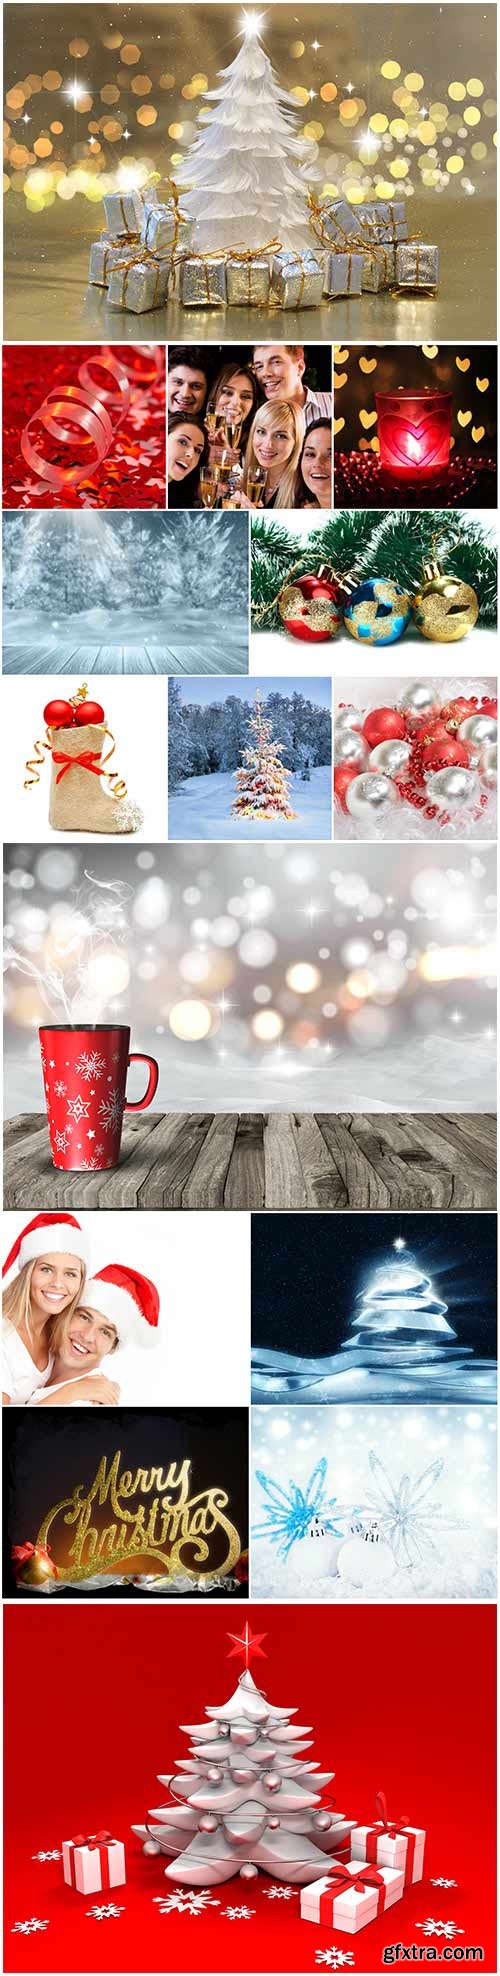 New year raster graphics collection - 14